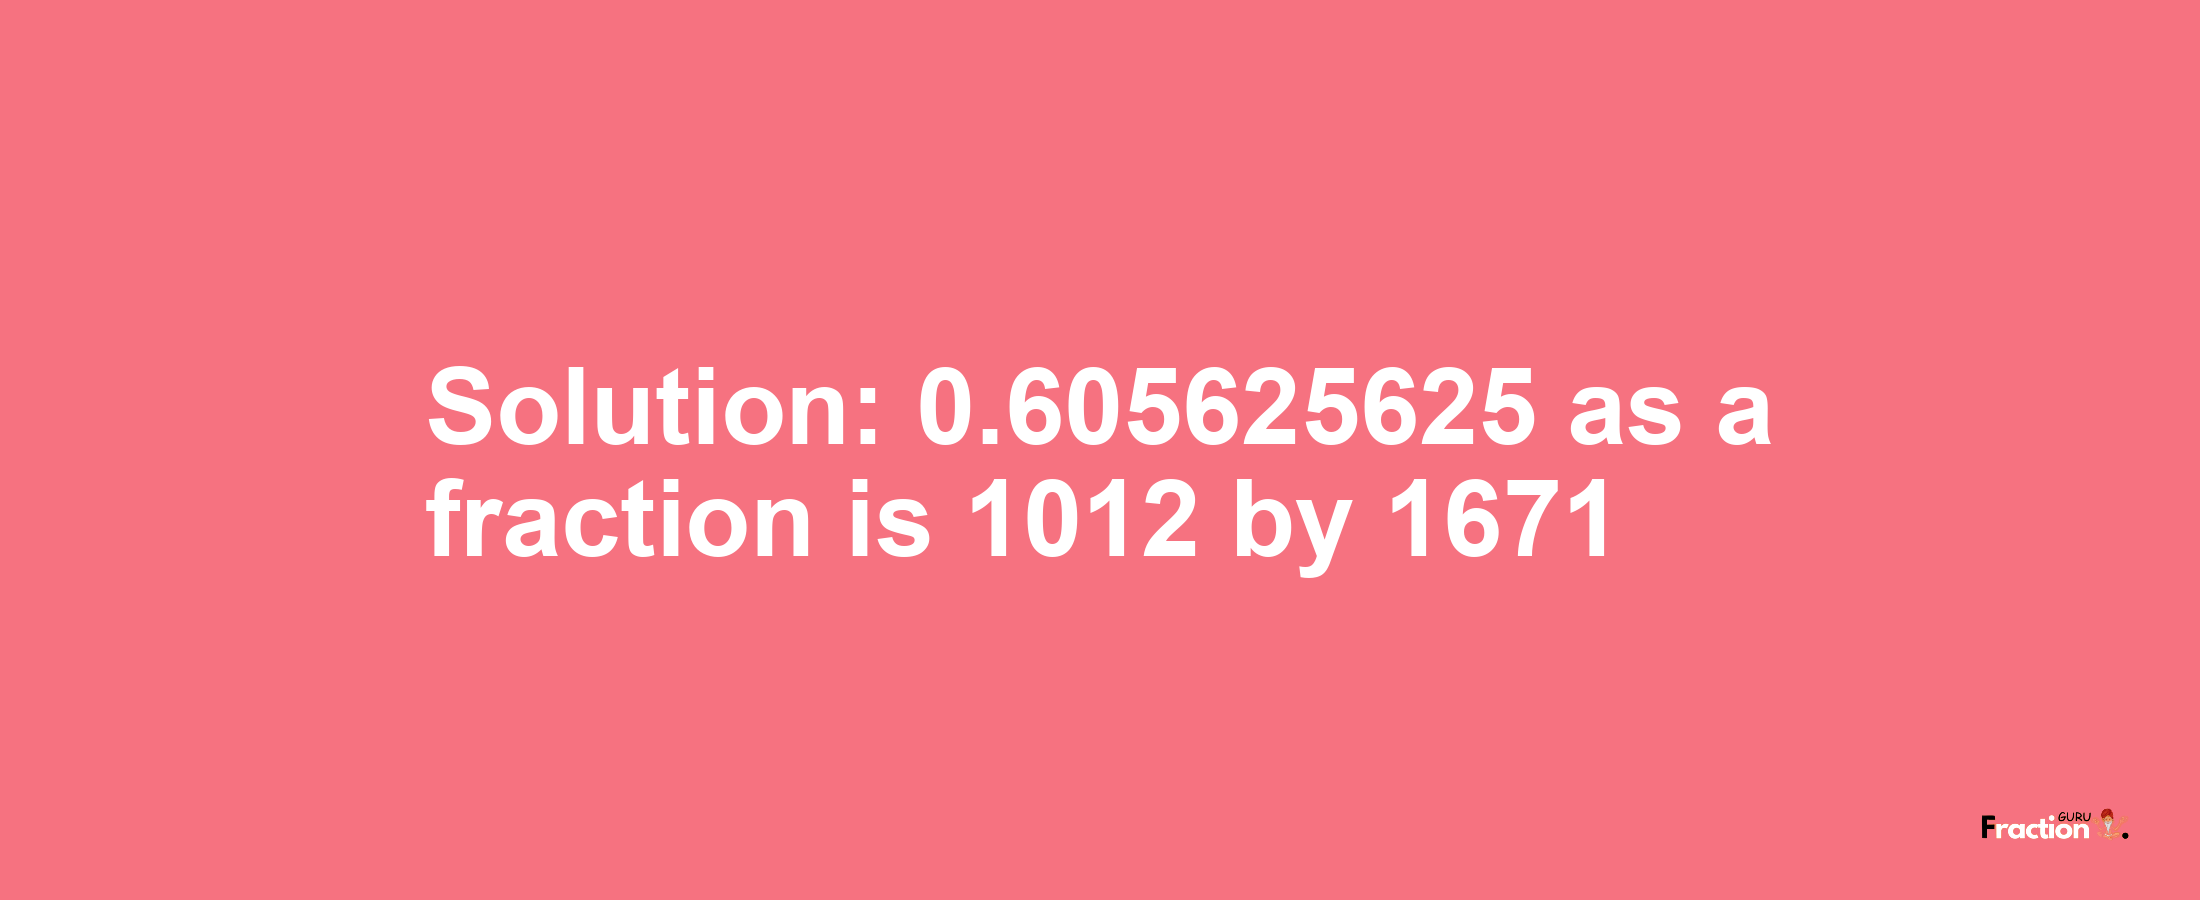 Solution:0.605625625 as a fraction is 1012/1671